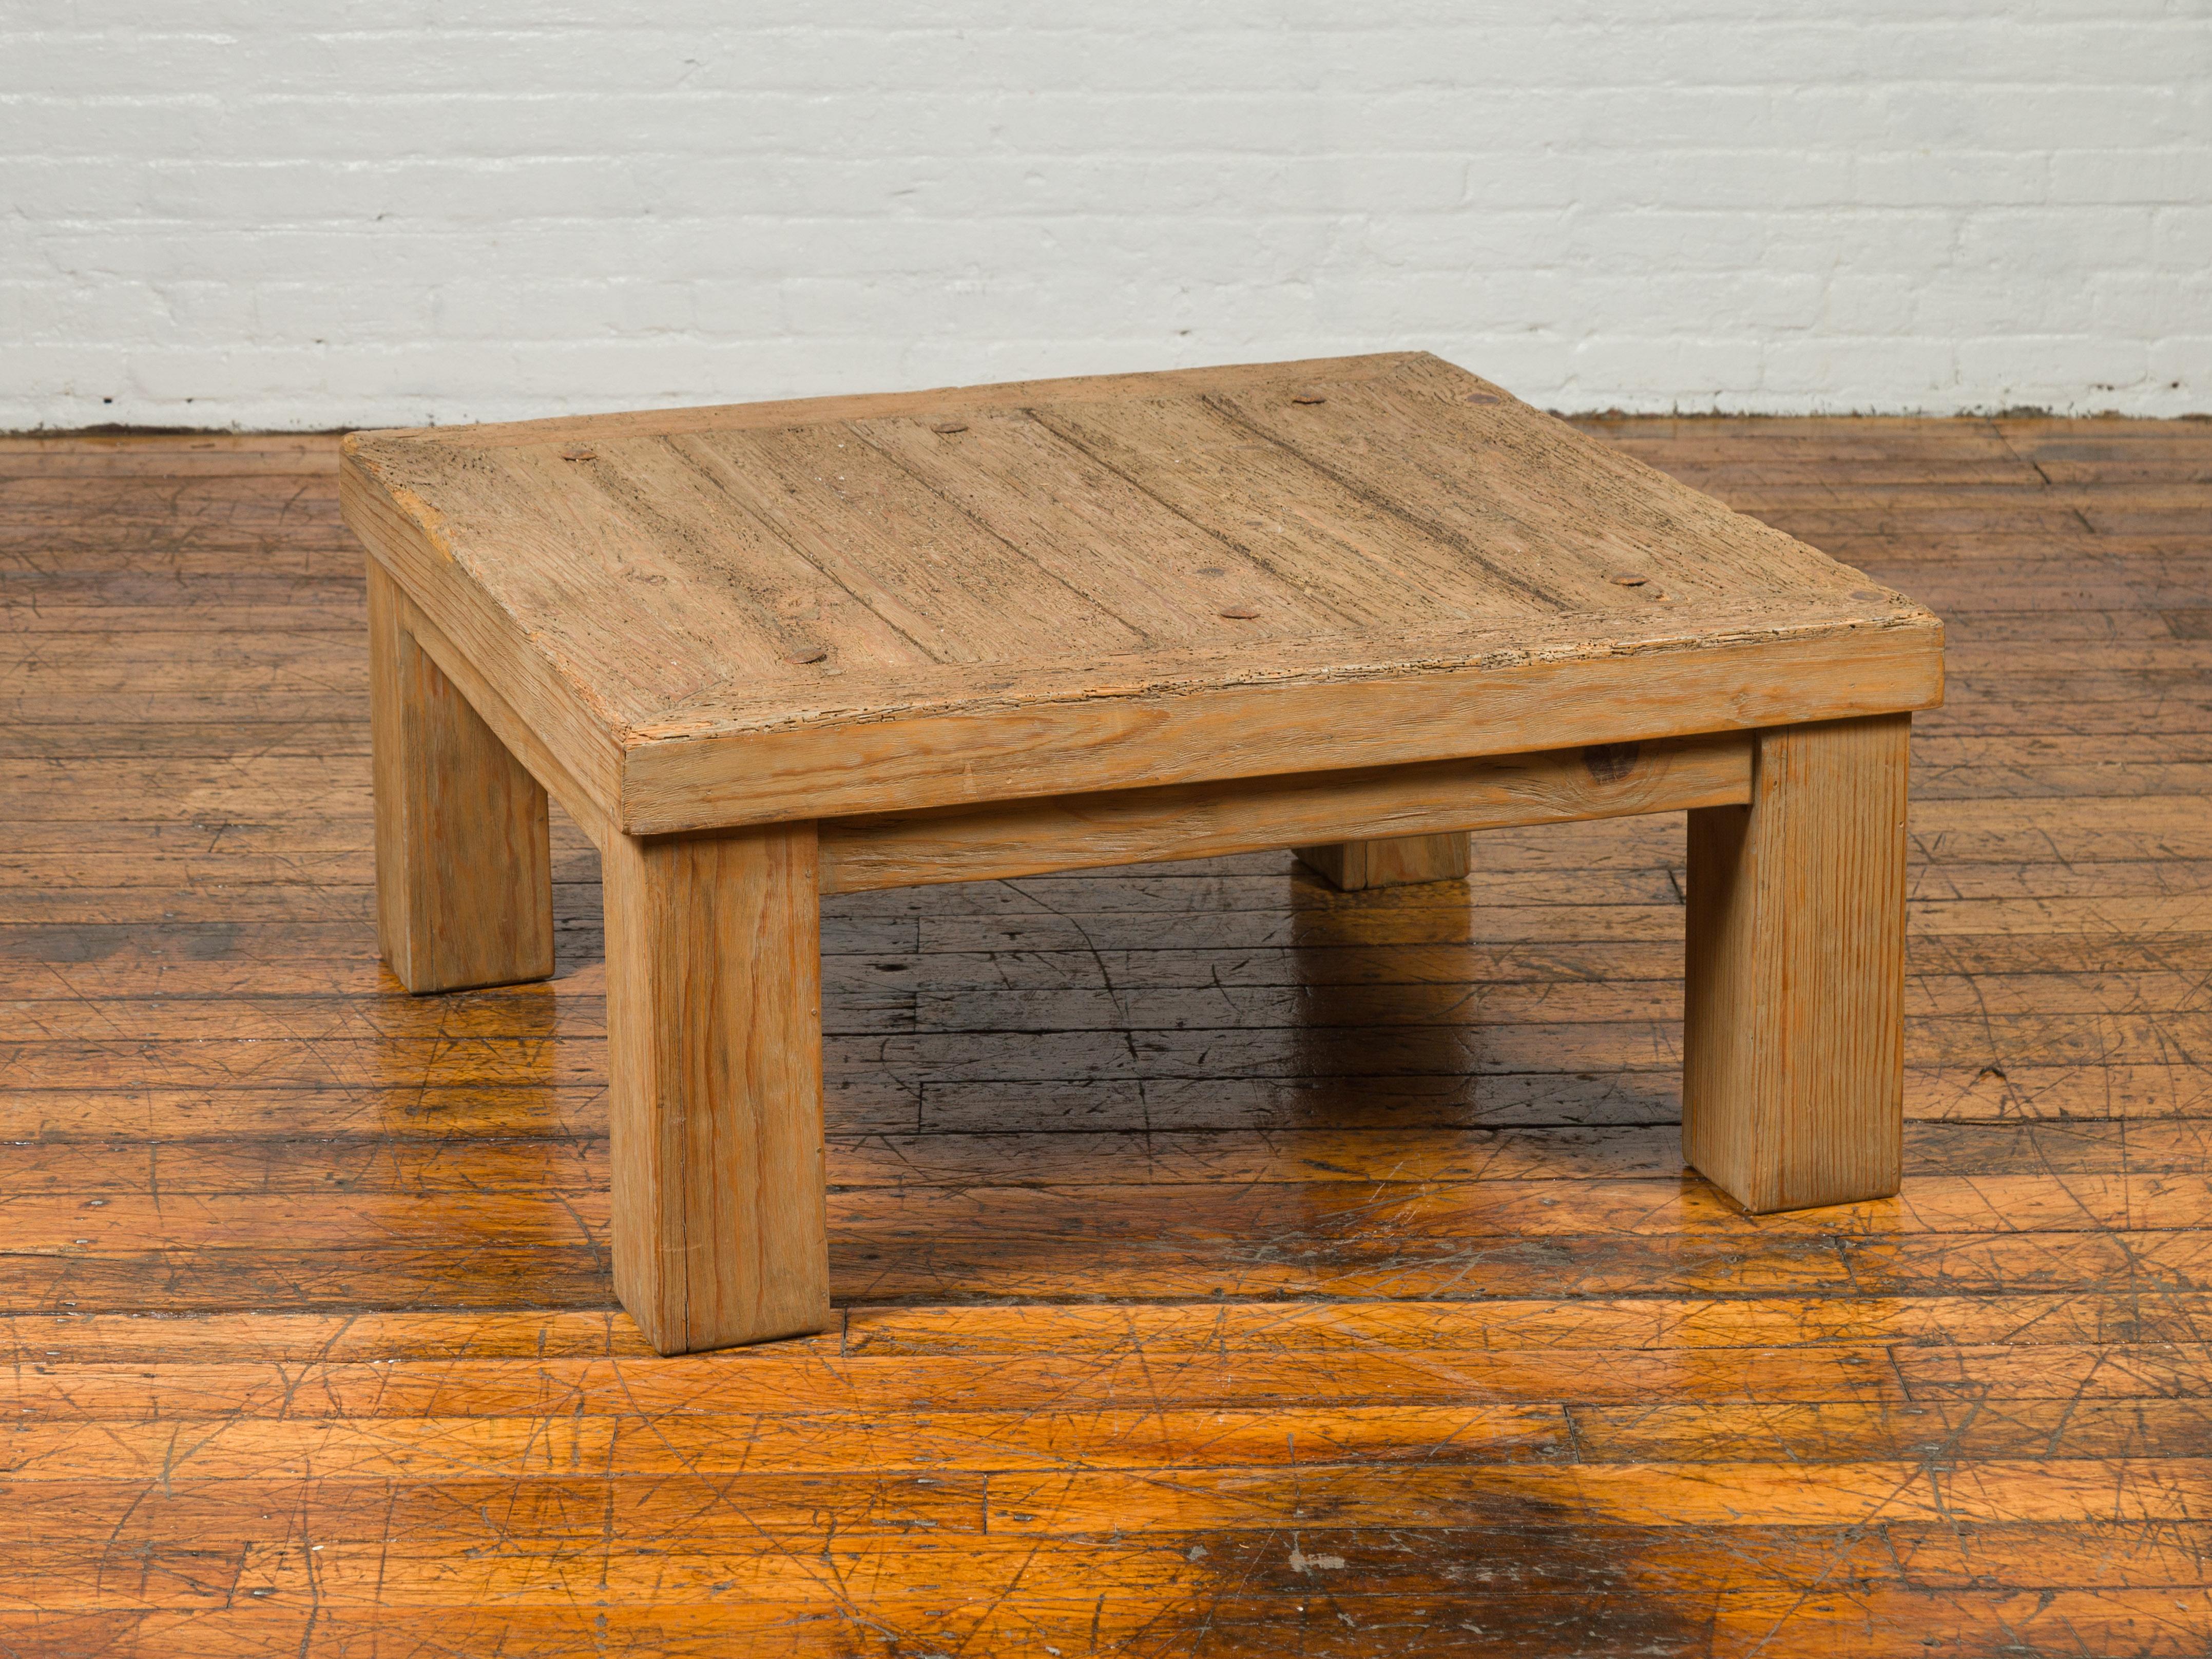 Vintage Driftwood Midcentury Coffee Table from Mexico with Square Legs 3